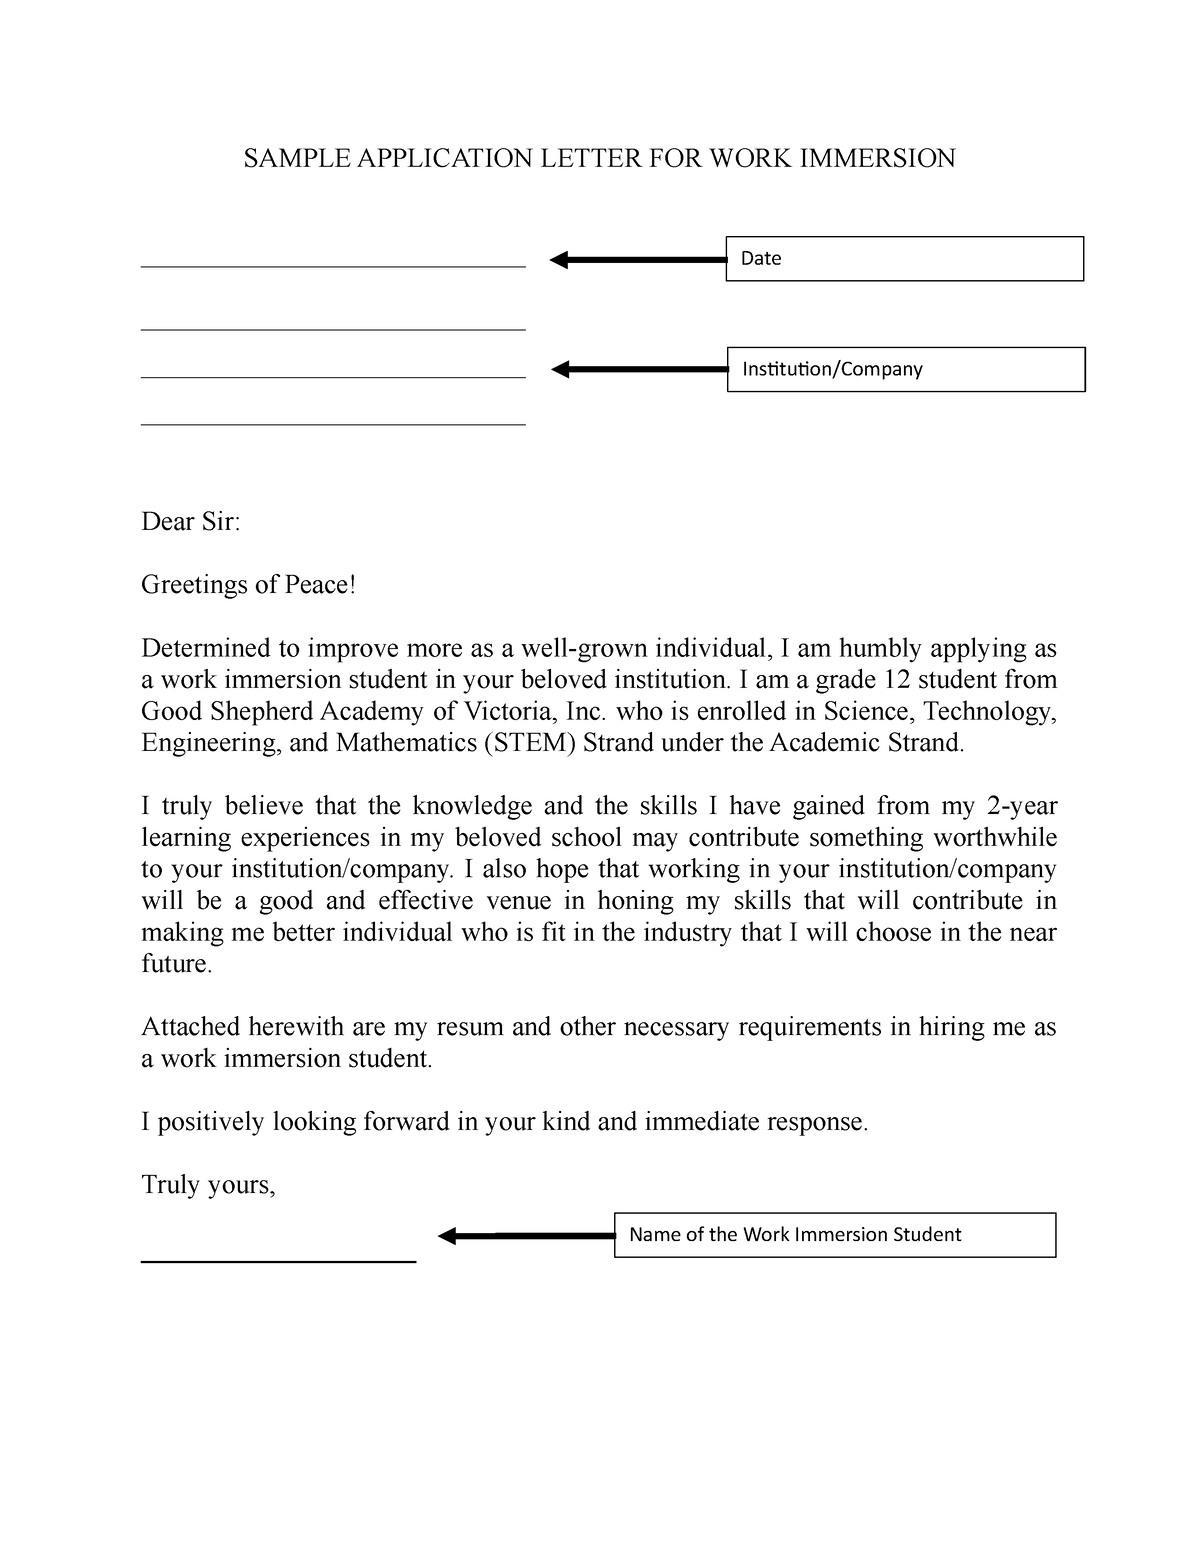 example of cover letter in work immersion